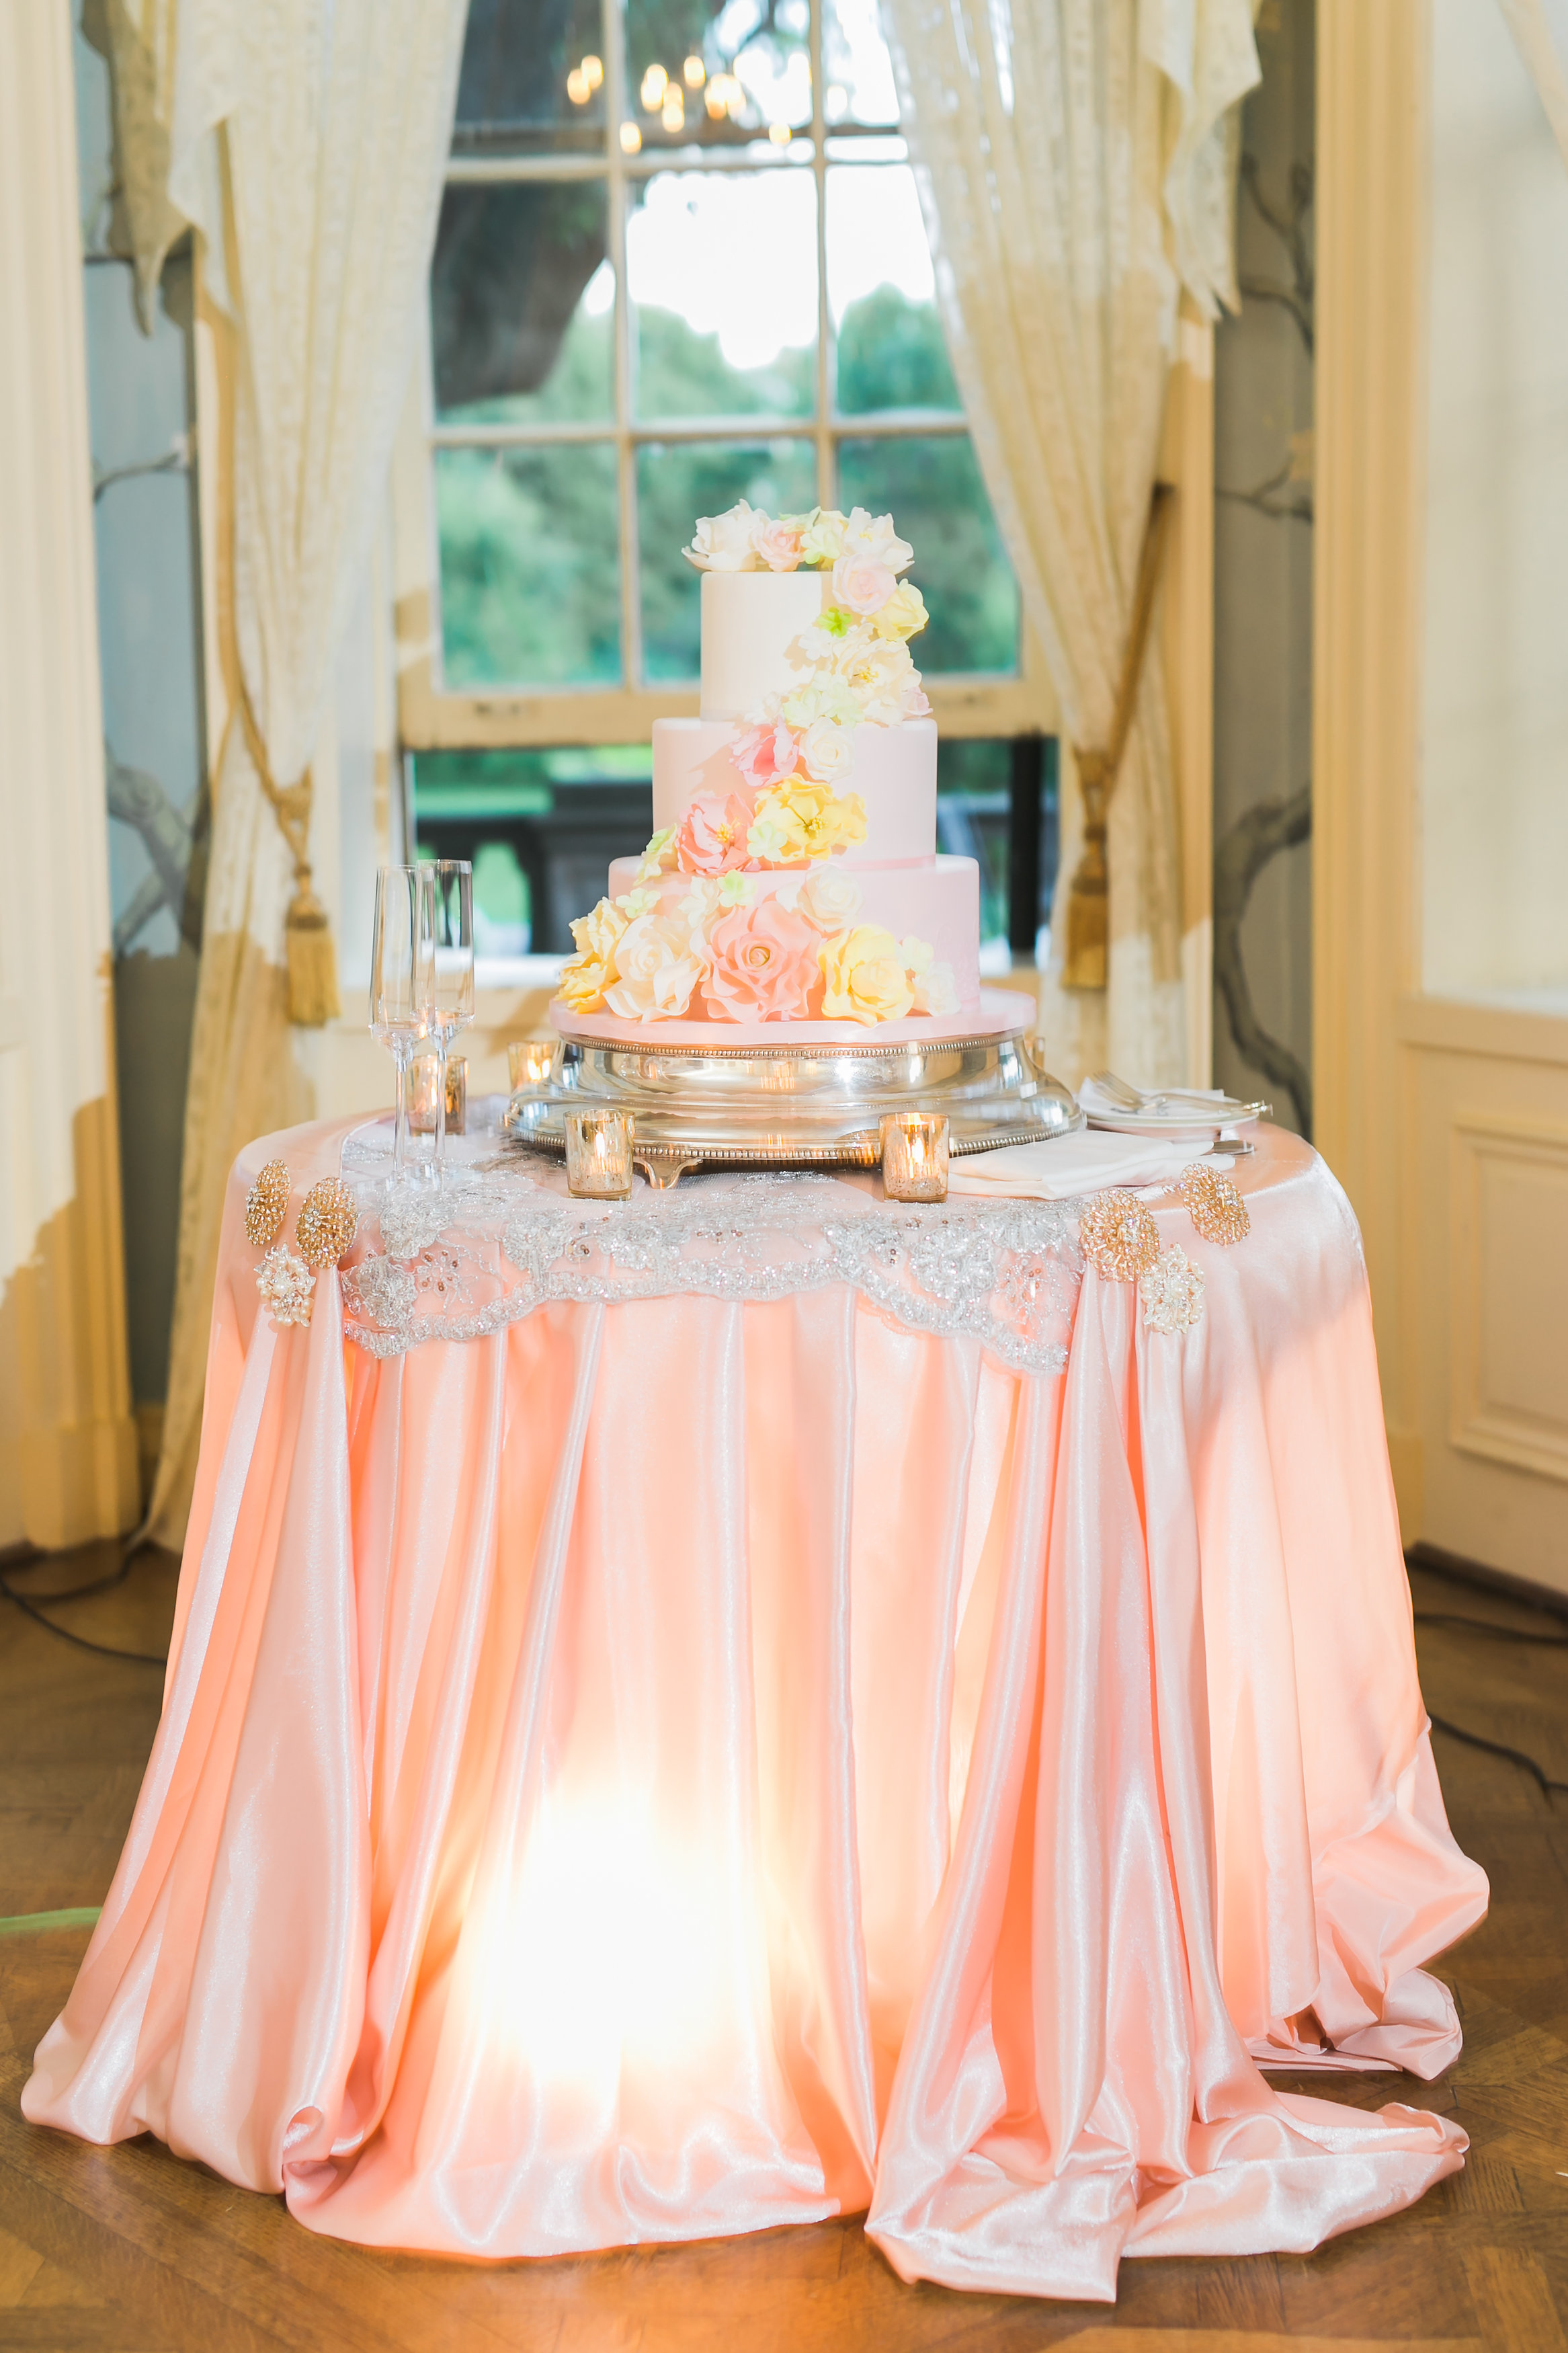 Wedding cake table in blush pink and gold. Toronto wedding decor at Graydon Hall by Secrets Floral.